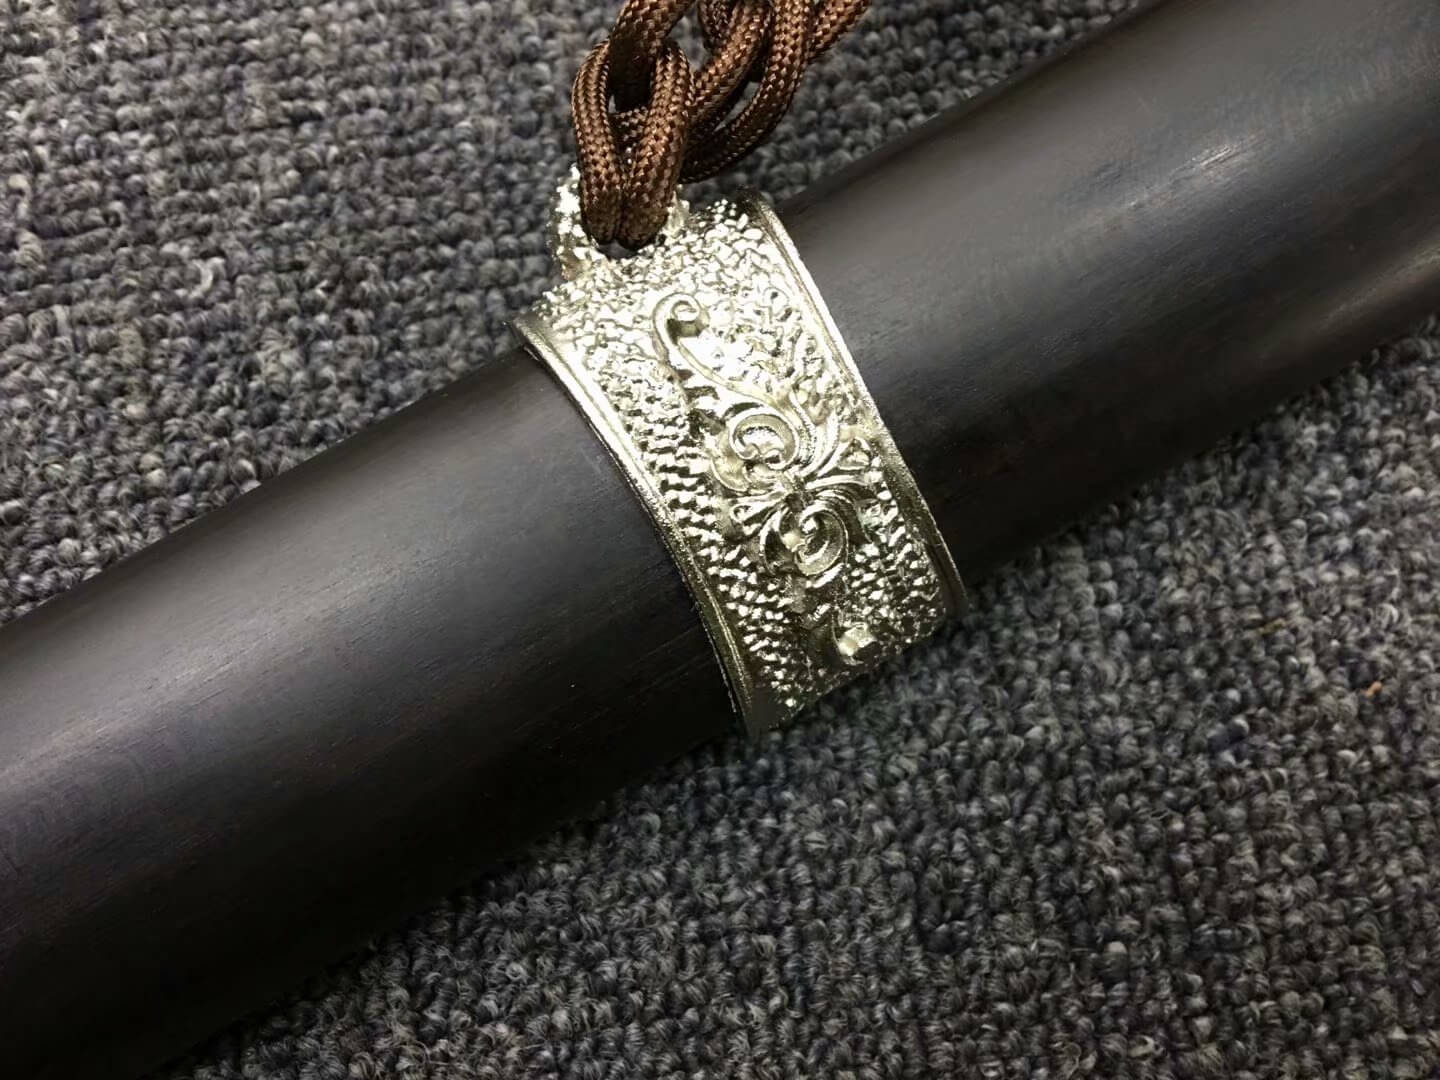 Longquan sword,High carbon steel etch blade,Black wood,Alloy fittings - Chinese sword shop